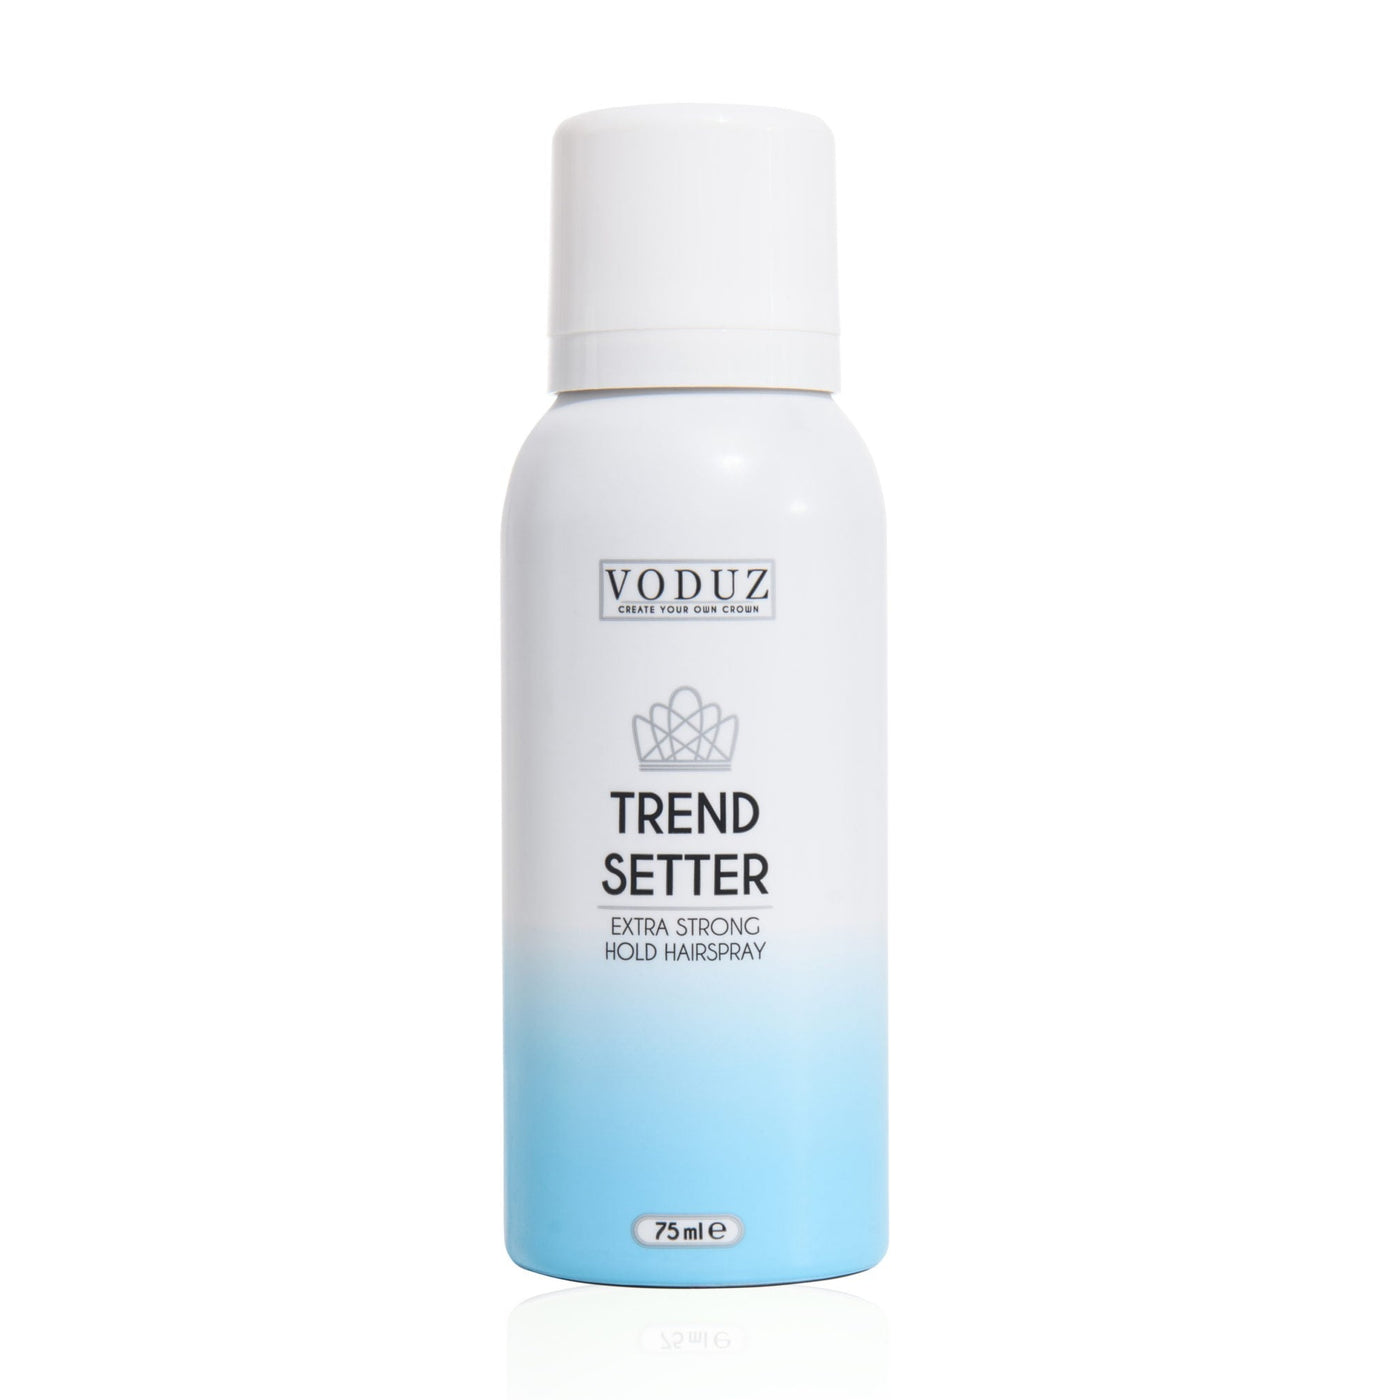 'Trend Setter' - Extra Strong Hold Hairspray (75ml)